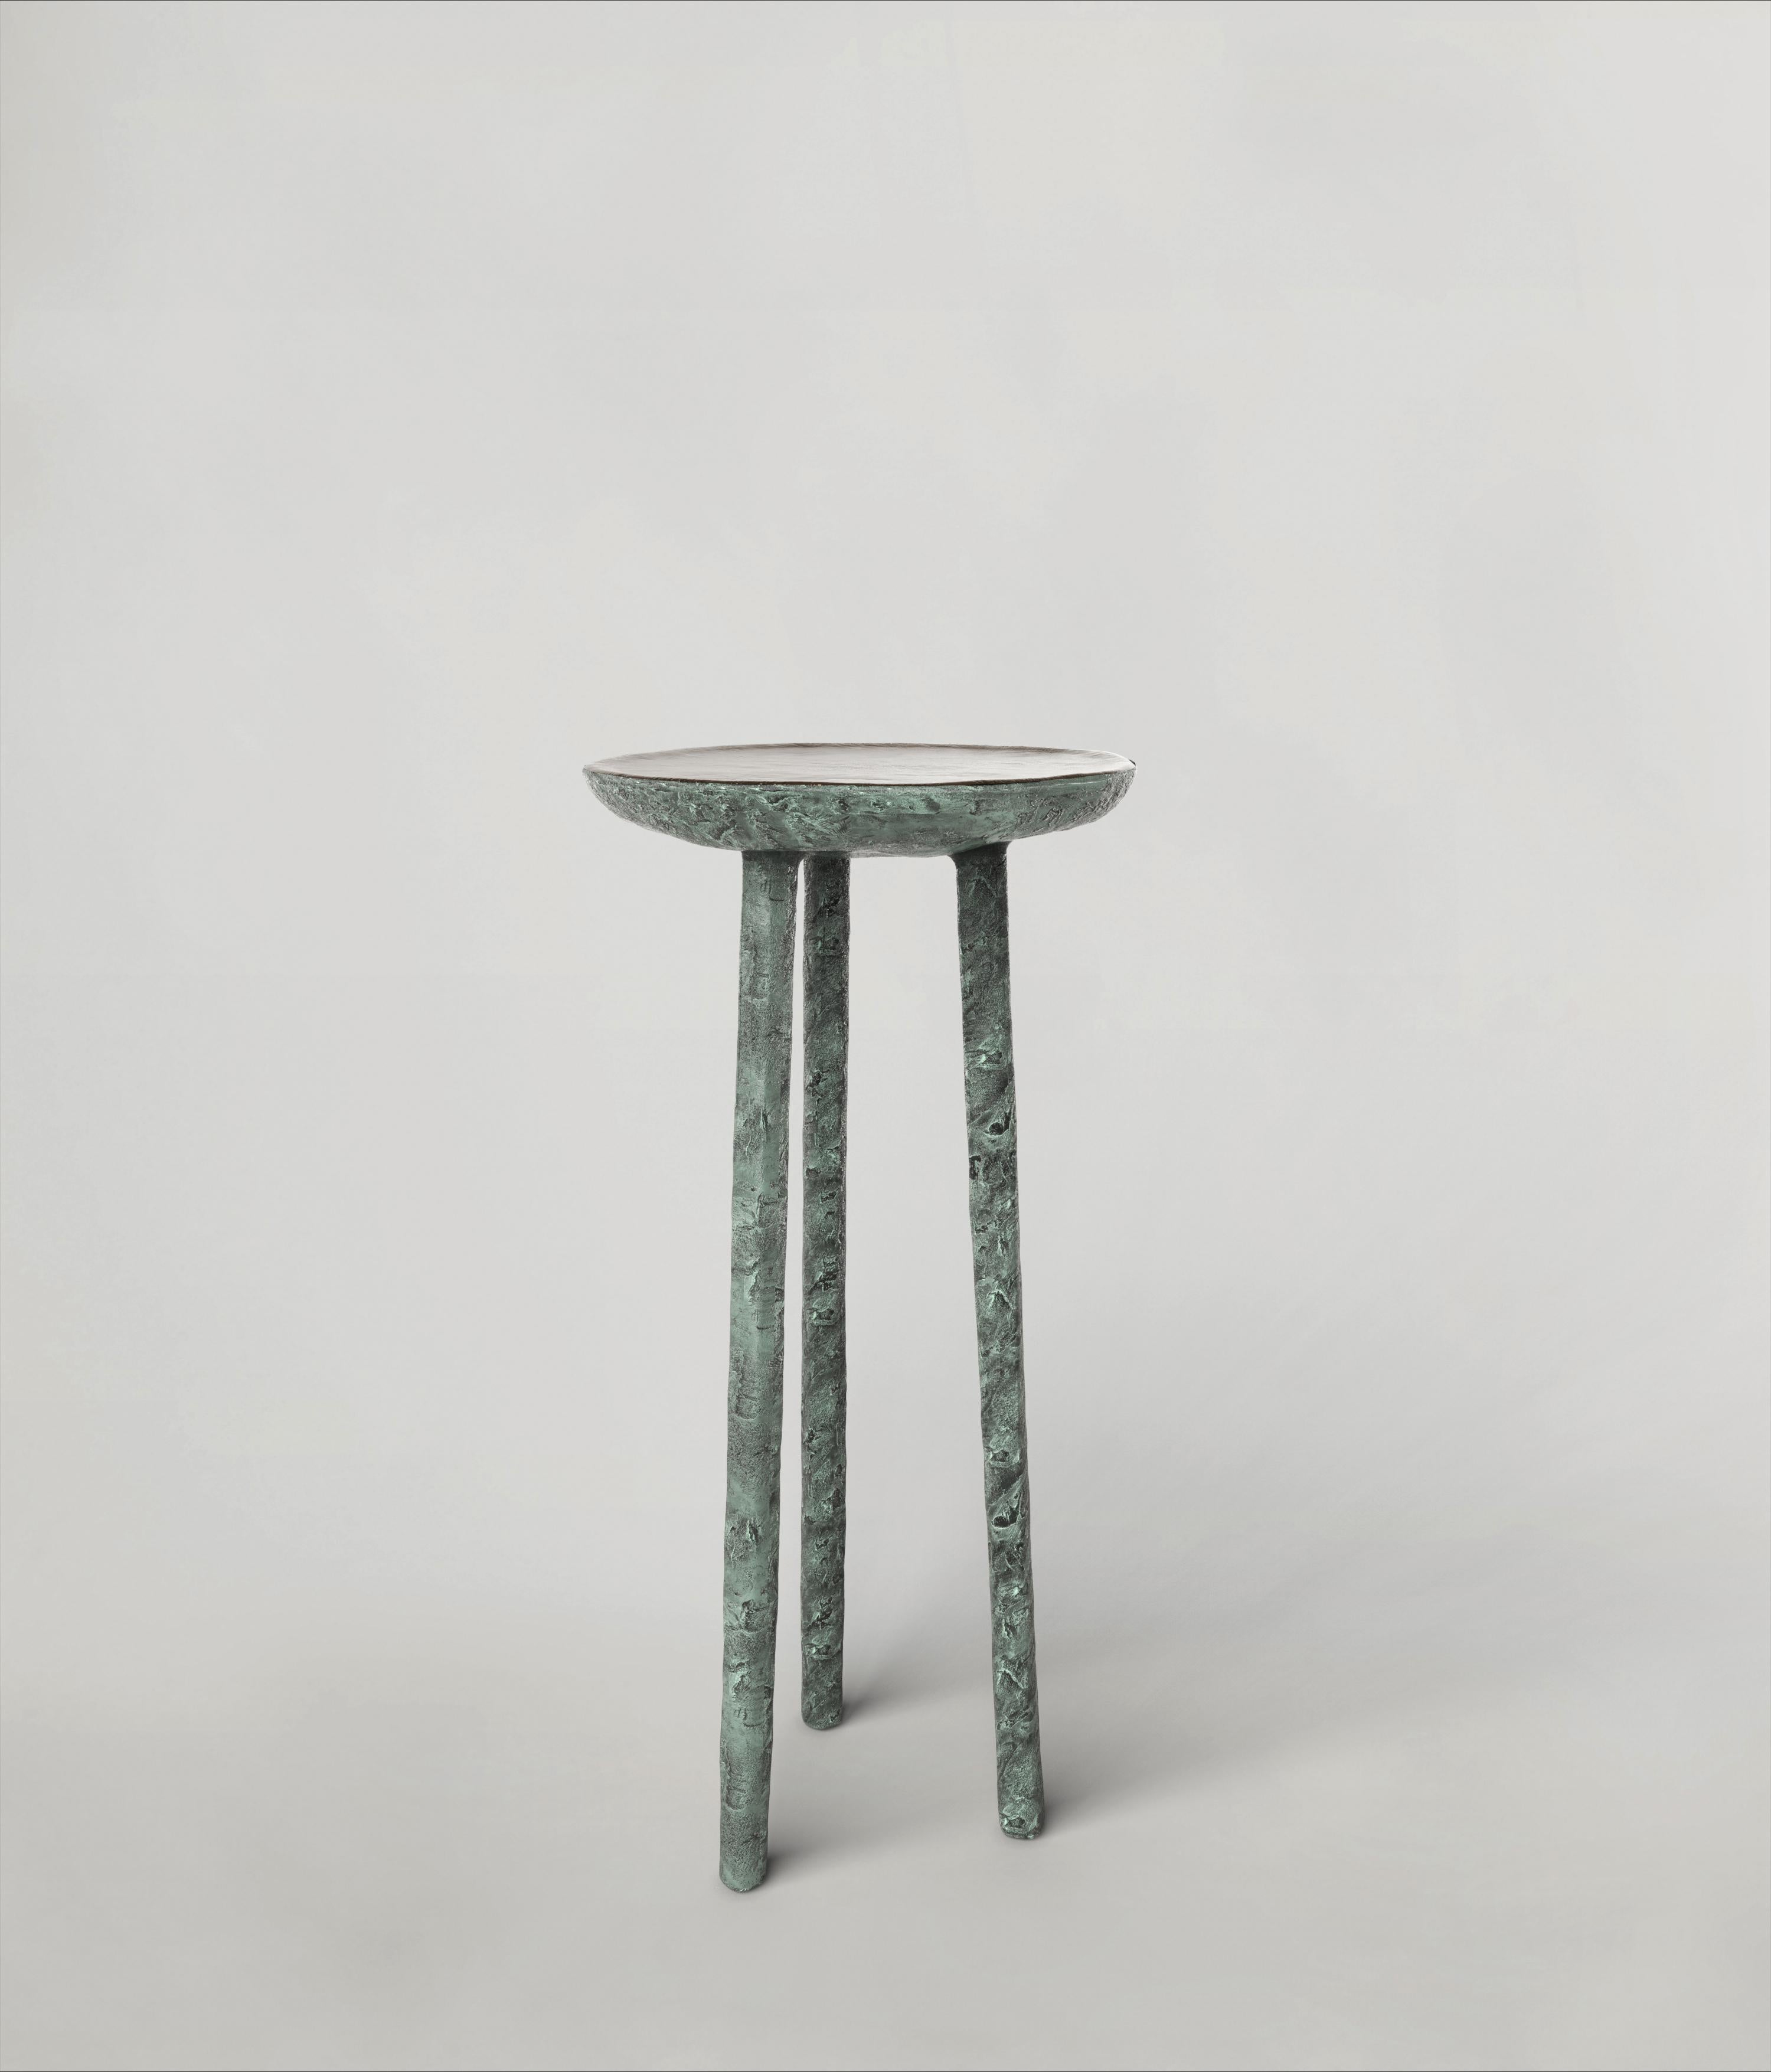 Comma V3 High Stool by Edizione Limitata
Limited edition of 150 pieces. Signed and numbered.
Dimensions: D90 x W40 x H130 cm
Materials: green patina bronze

Comma is a 21st century collection of seatings made by Italian artisans in bronze with